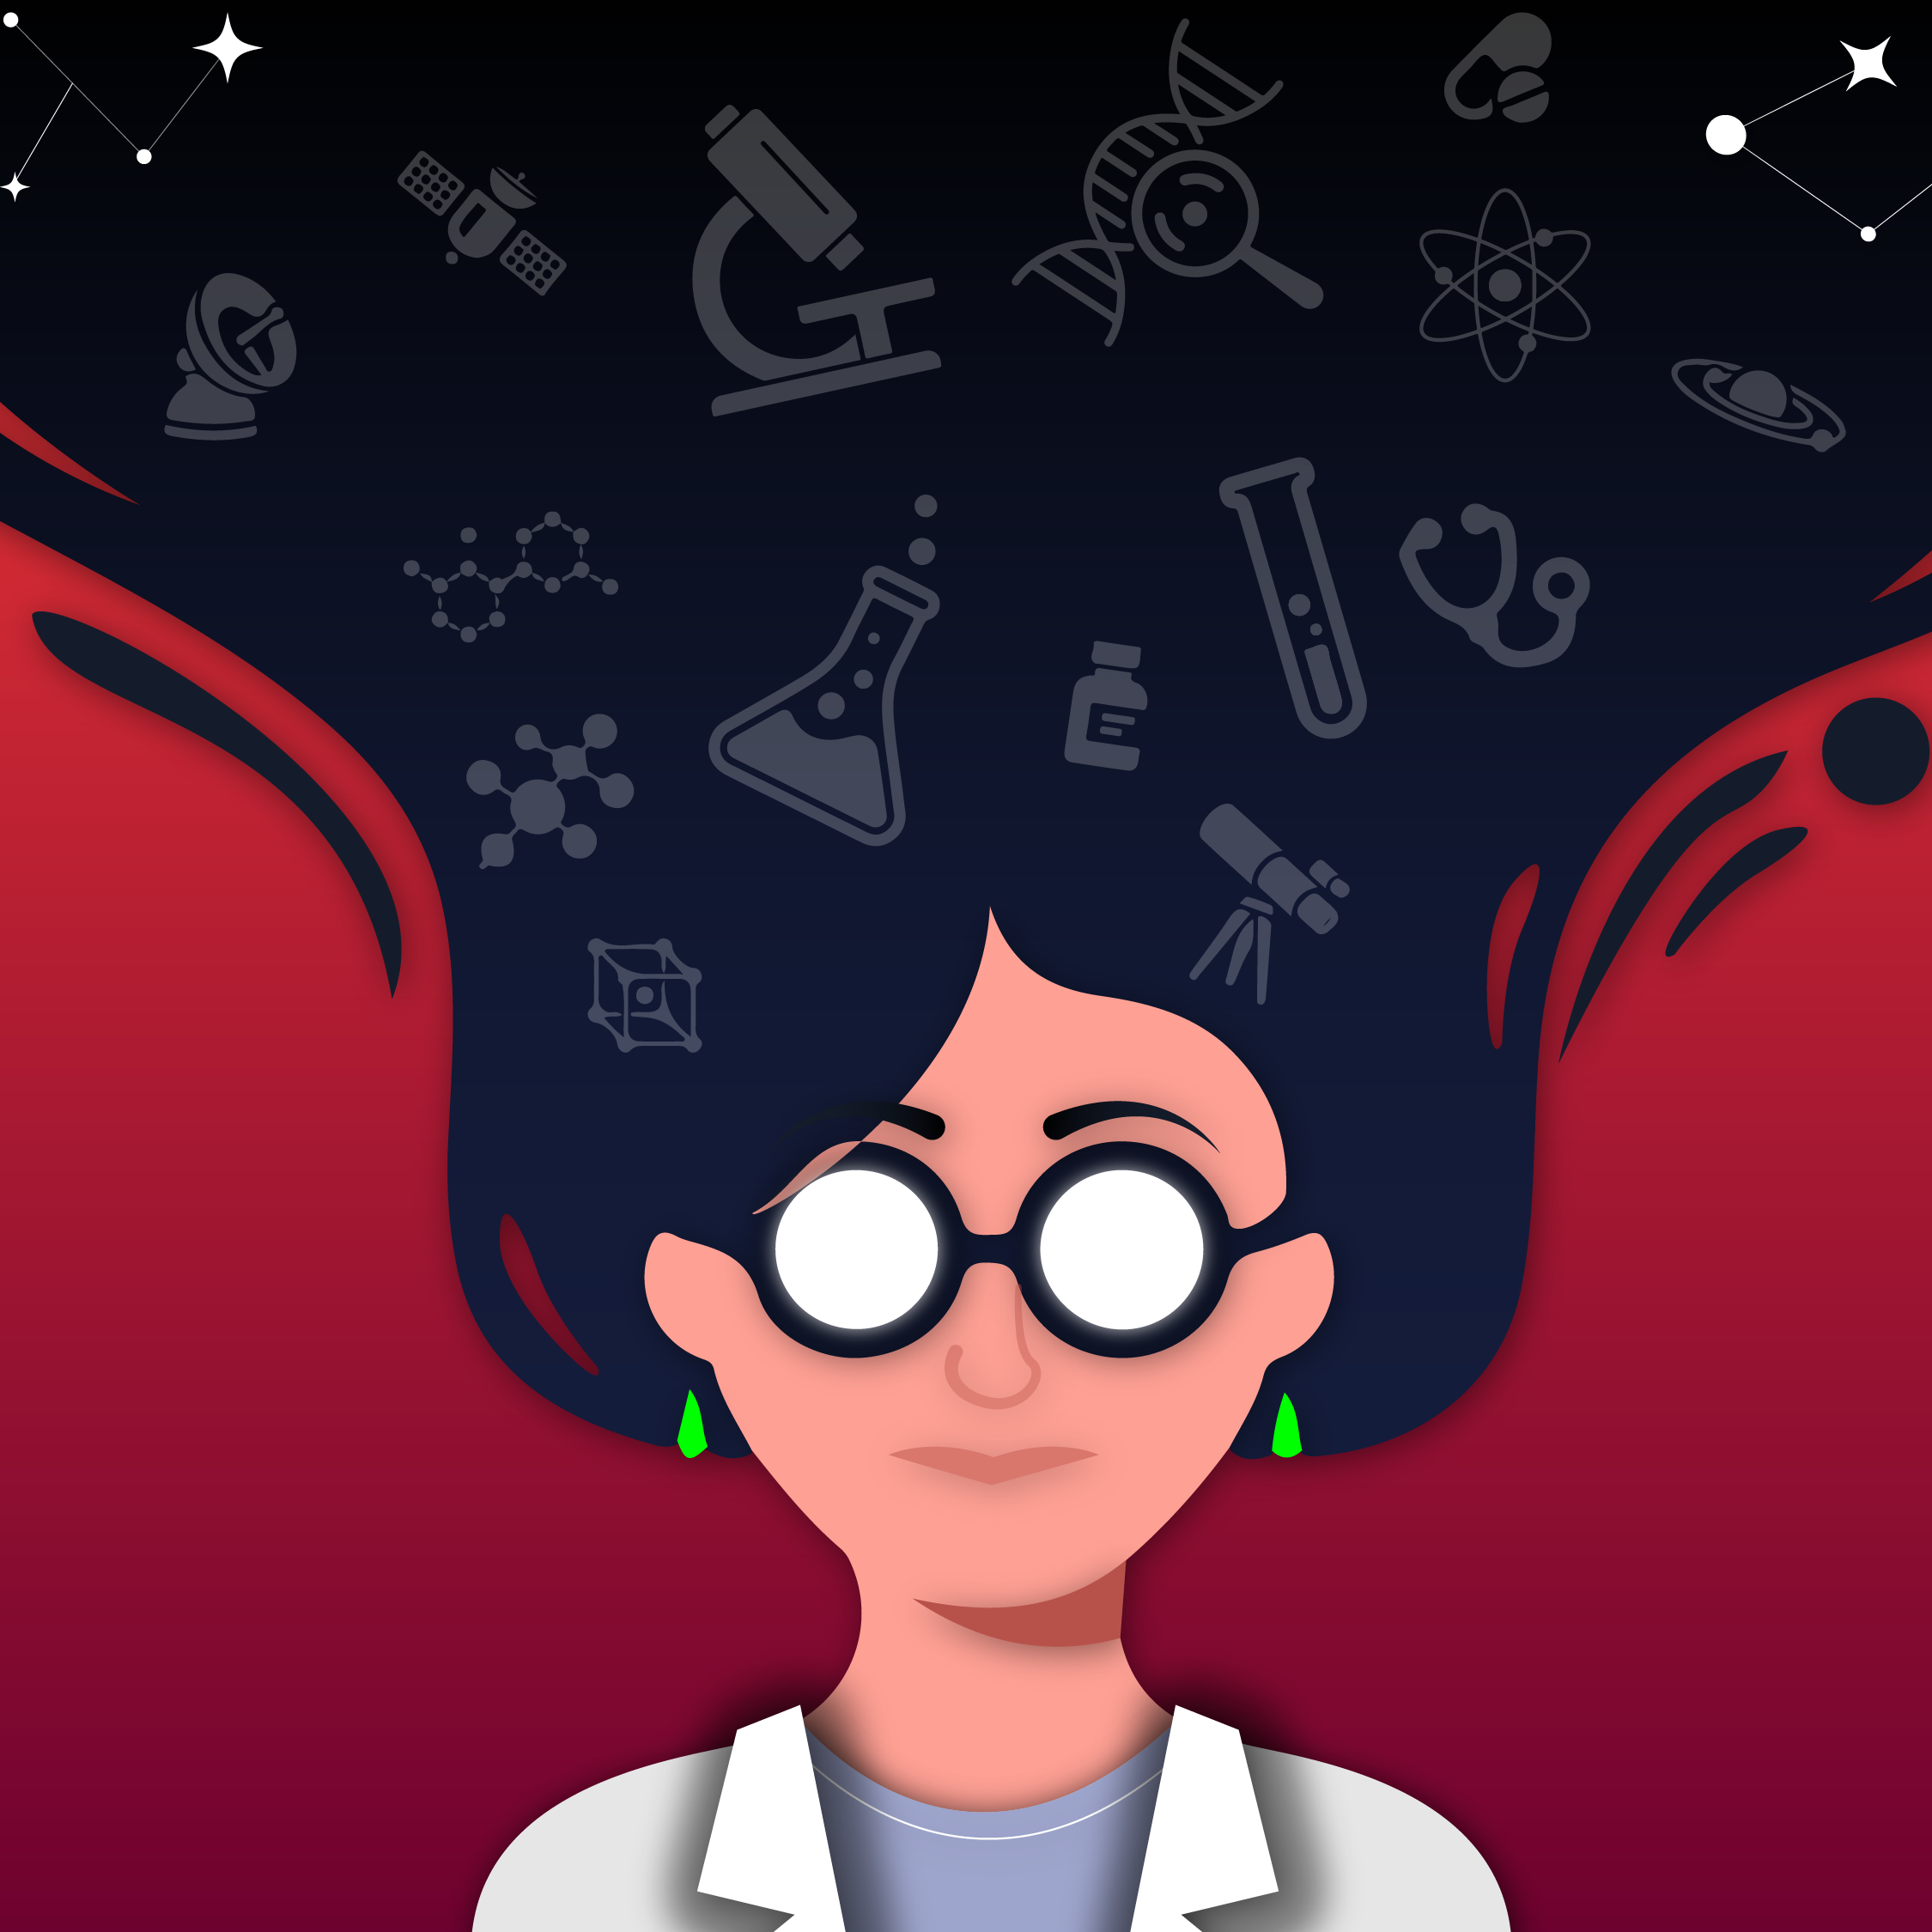 Illustration of woman in a lab coat wearing glasses and green earrings. In her hair there are outlines and silhouettes of lab materials such as microscopes and test tubes. 